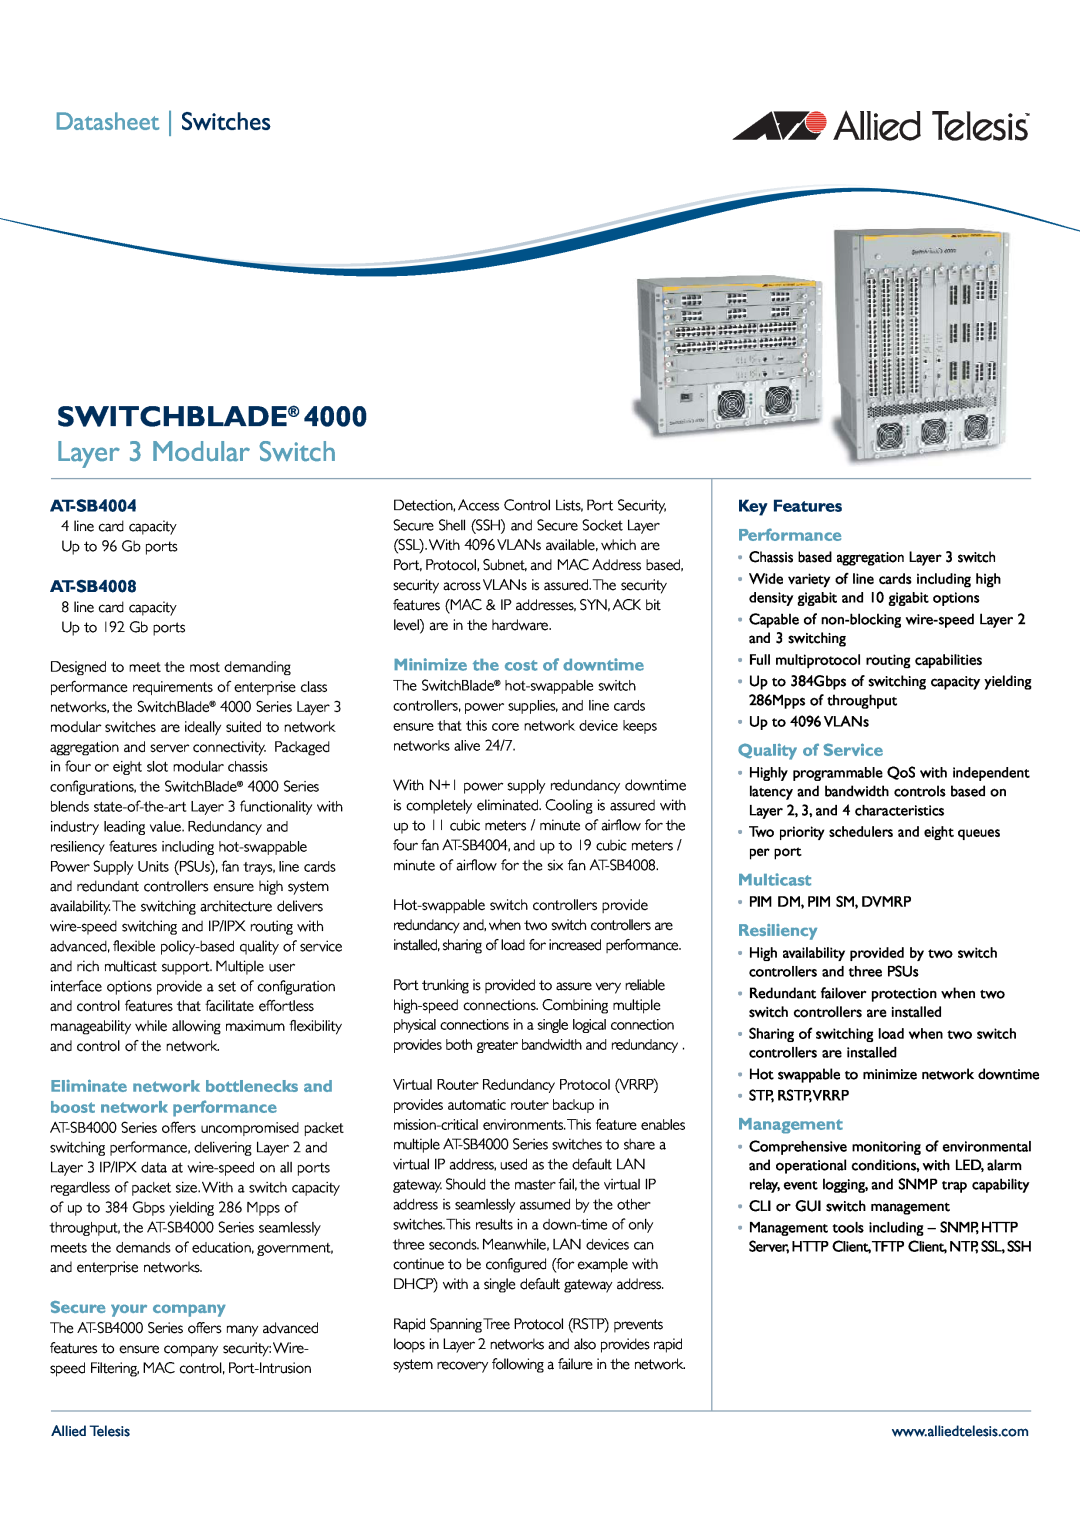 Allied Telesis AT-SB4008 manual Layer 3 Modular Switch, Eliminate network bottlenecks and boost network performance 